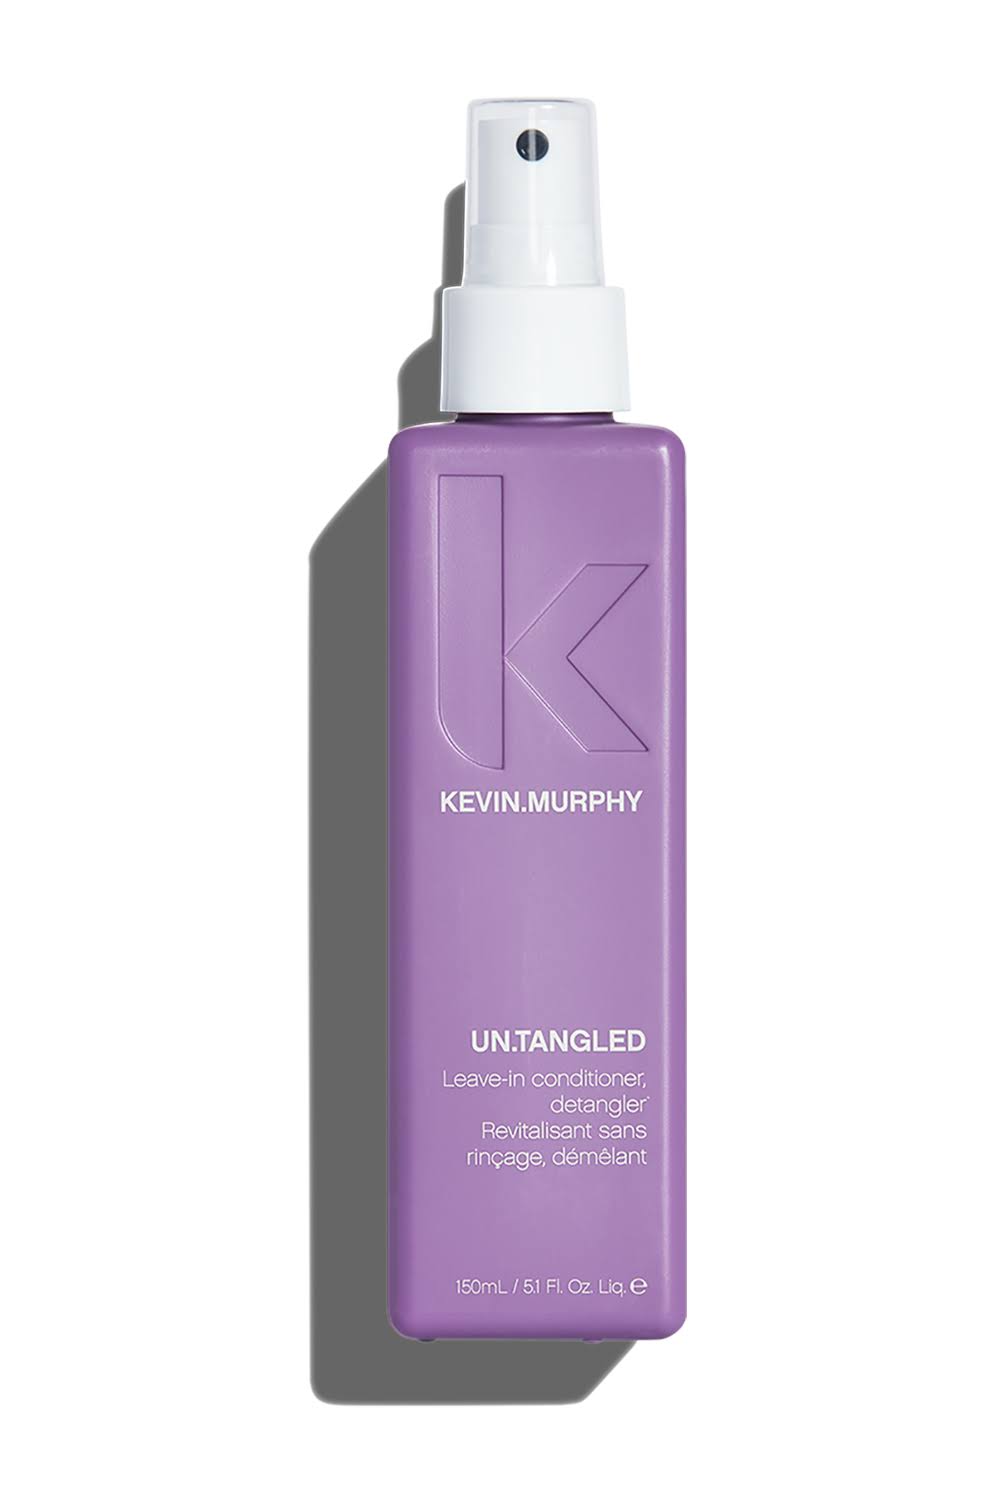 Kevin Murphy Un Tangled Leave in Conditioner 5.1 oz